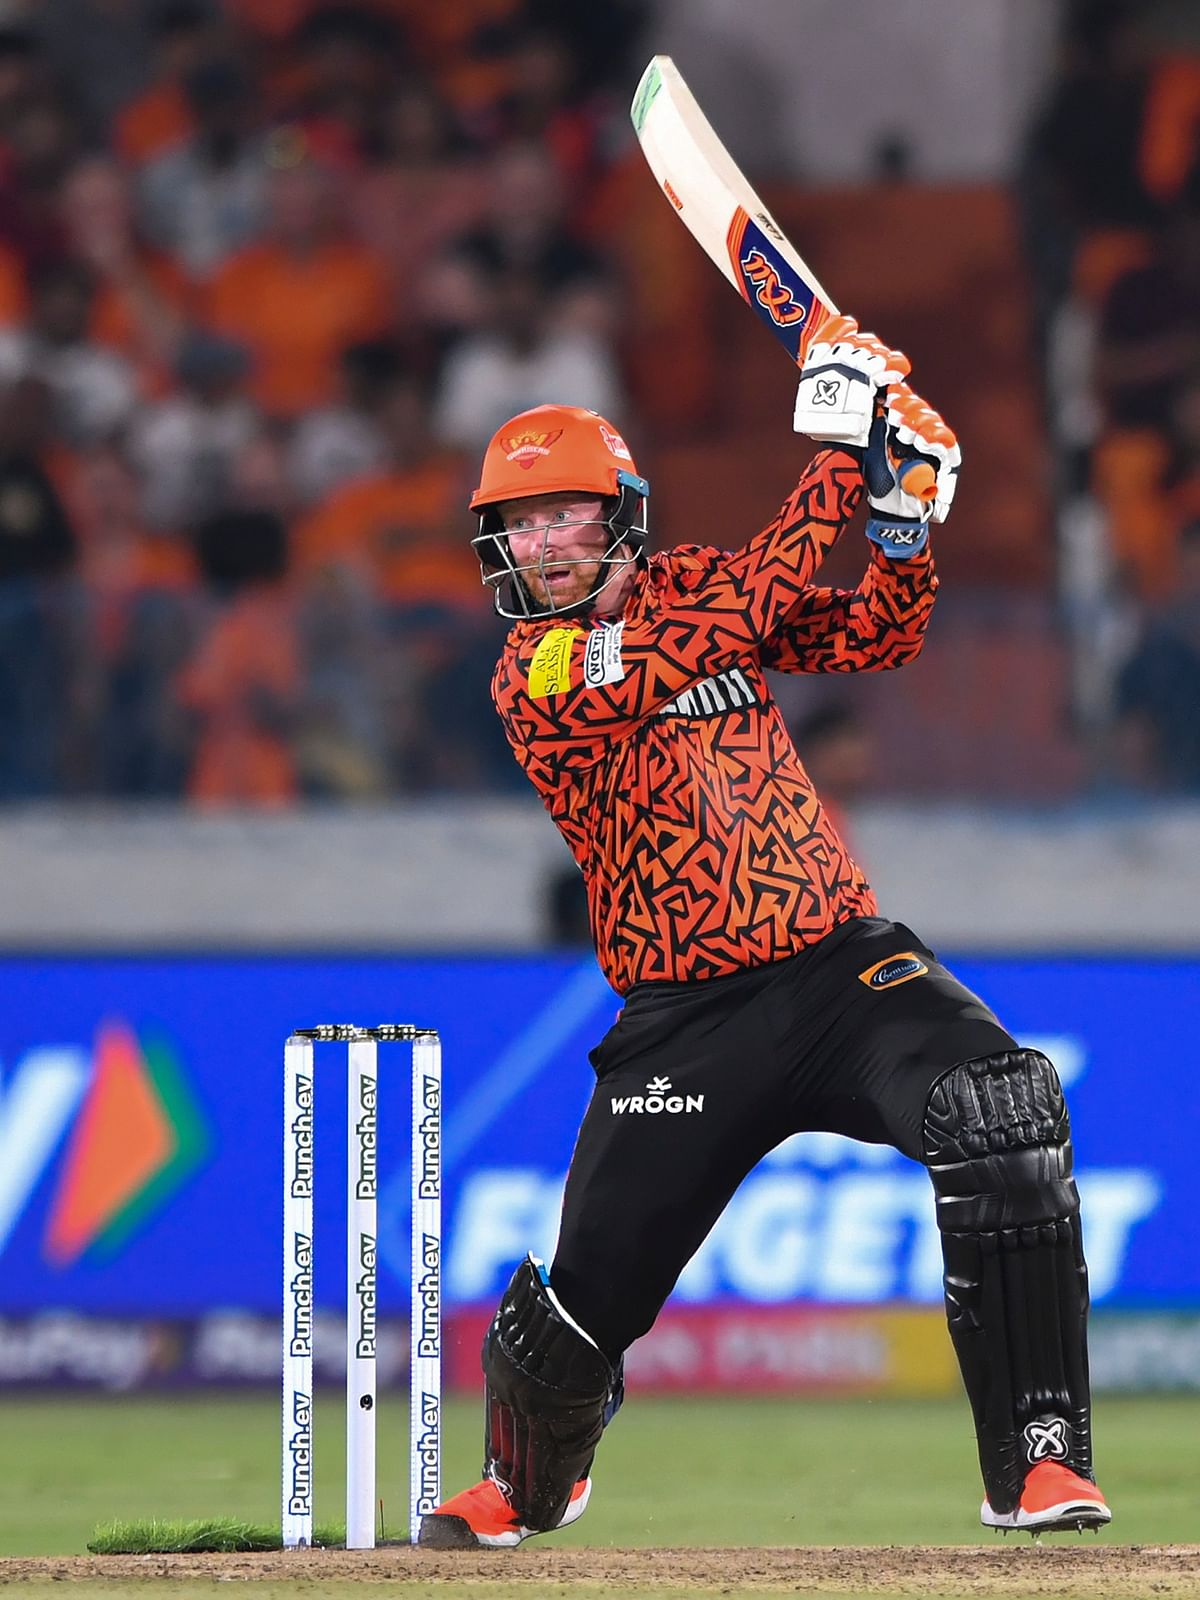 Continuing the momentum for SRH,  South Africa's Heinrich Klaasen displayed some power-hitting and smashed 80 runs in 34 balls.